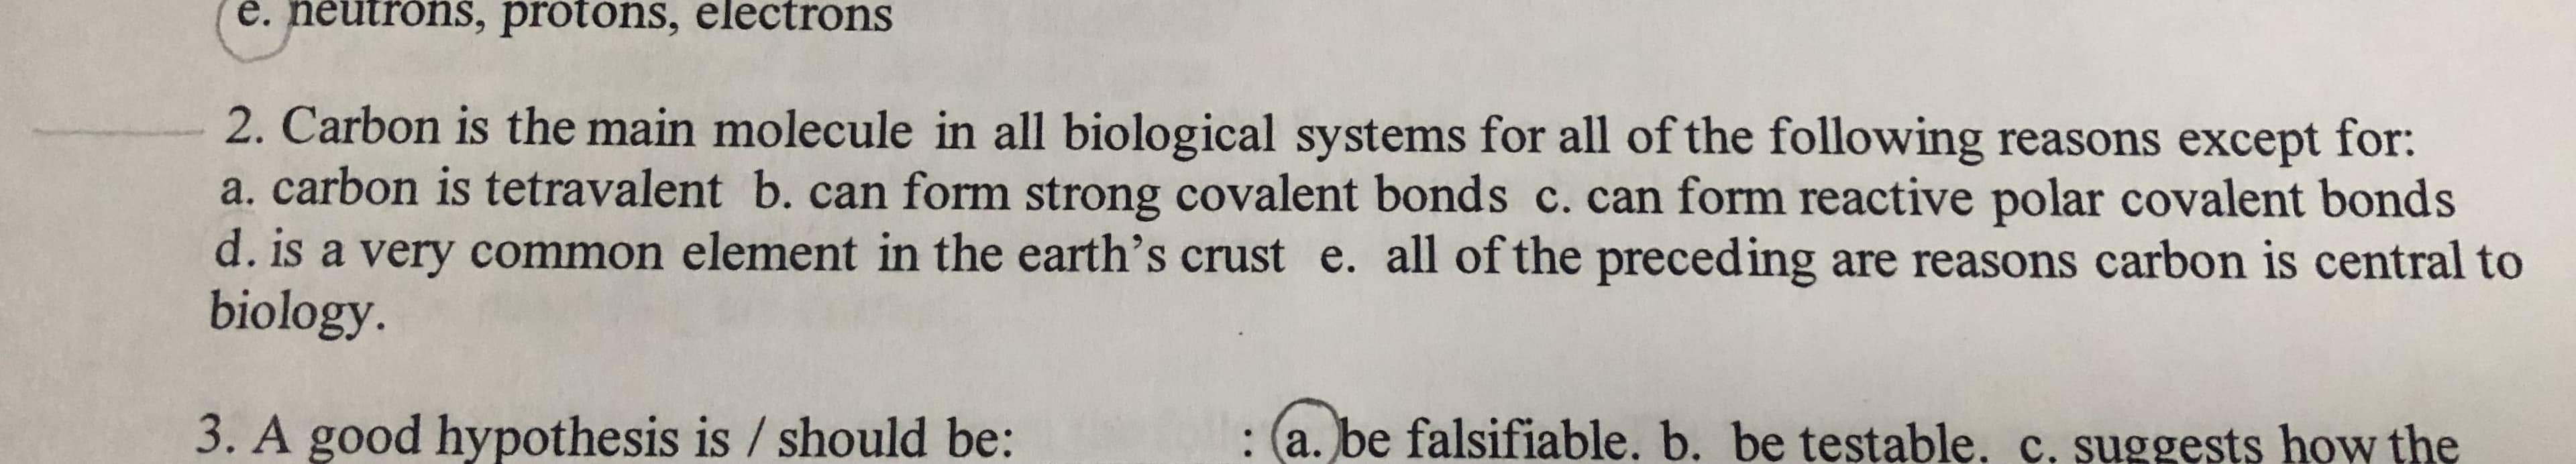 2. Carbon is the main molecule in all biological systems for all of the following reasons except for:
a. carbon is tetravalent b. can form strong covalent bonds c. can form reactive polar covalent bonds
d. is a very common element in the earth's crust e. all of the preceding are reasons carbon is central to
biology.
